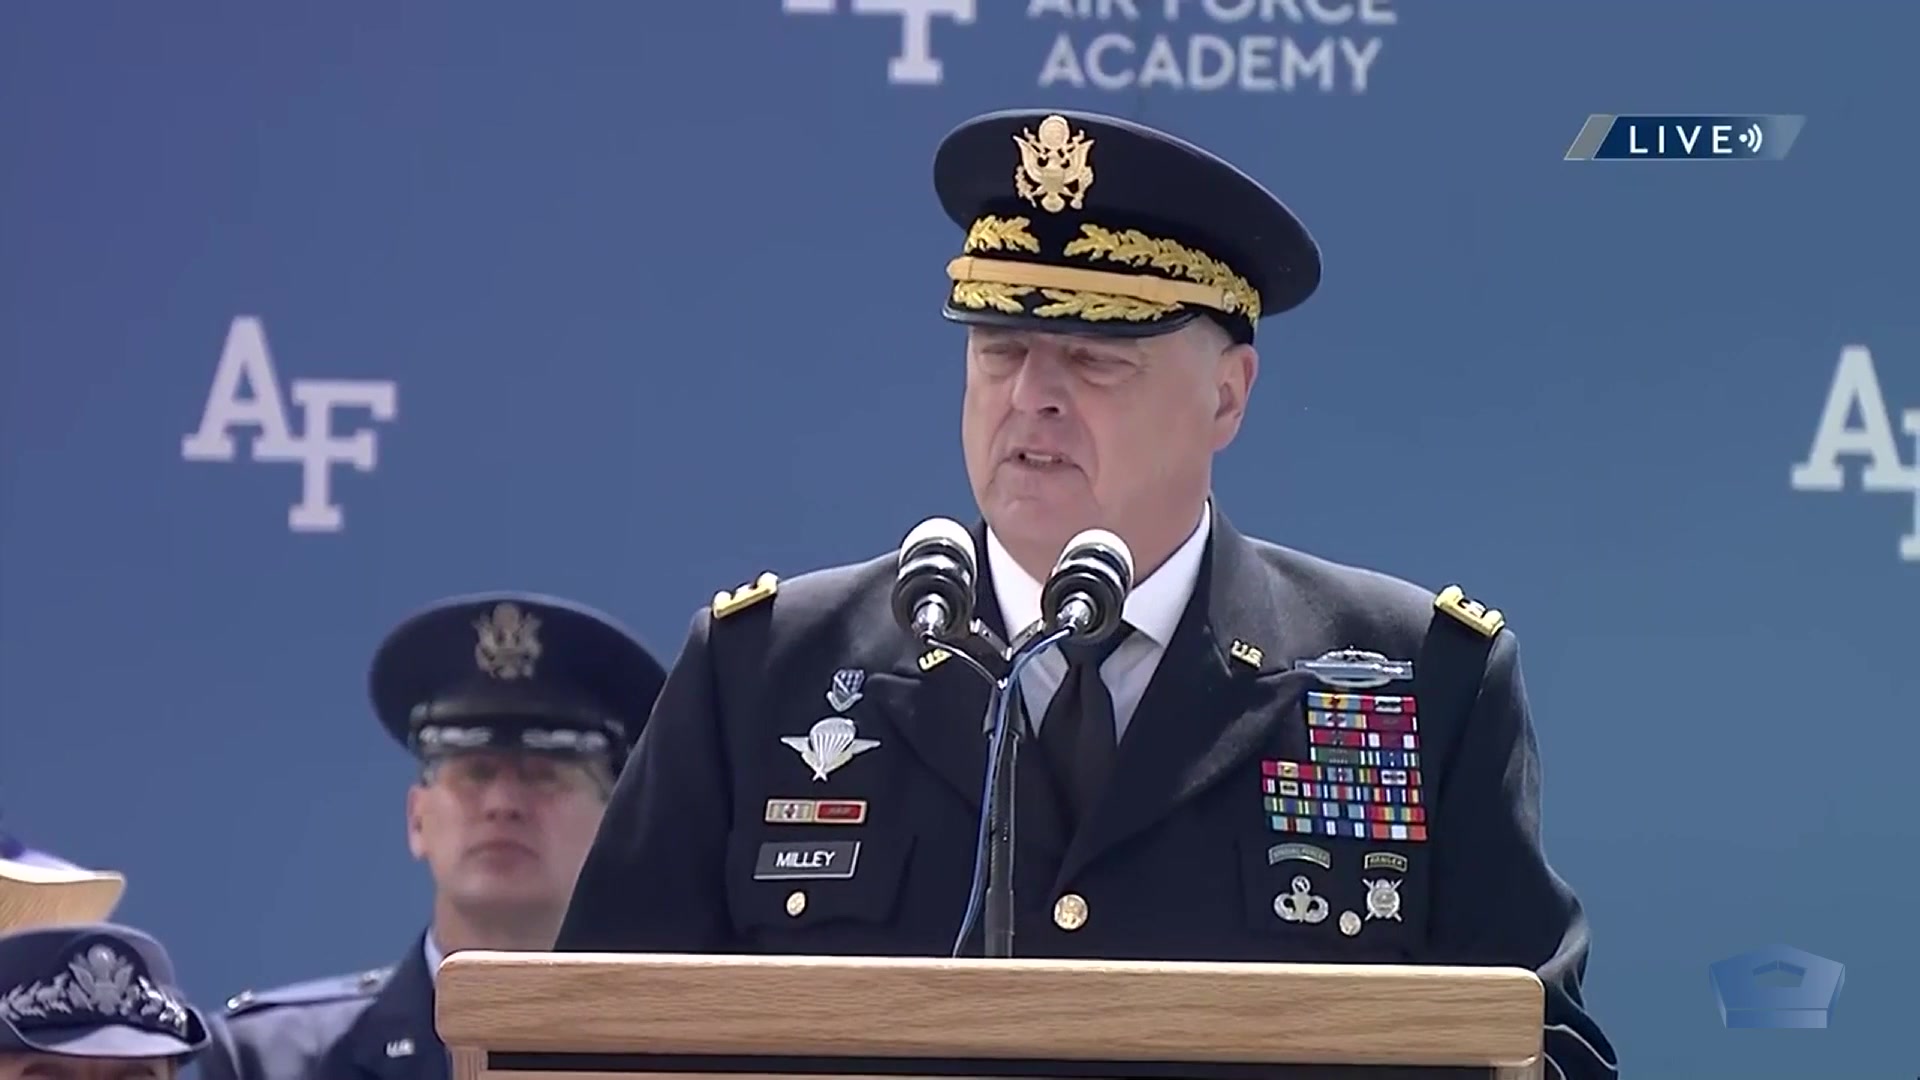 Army Gen. Mark Milley, chairman of the Joint Chiefs of Staff, delivers the commencement address for the graduation and commissioning ceremony of the Air Force Academy's Class of 2021, May 26, 2021.
